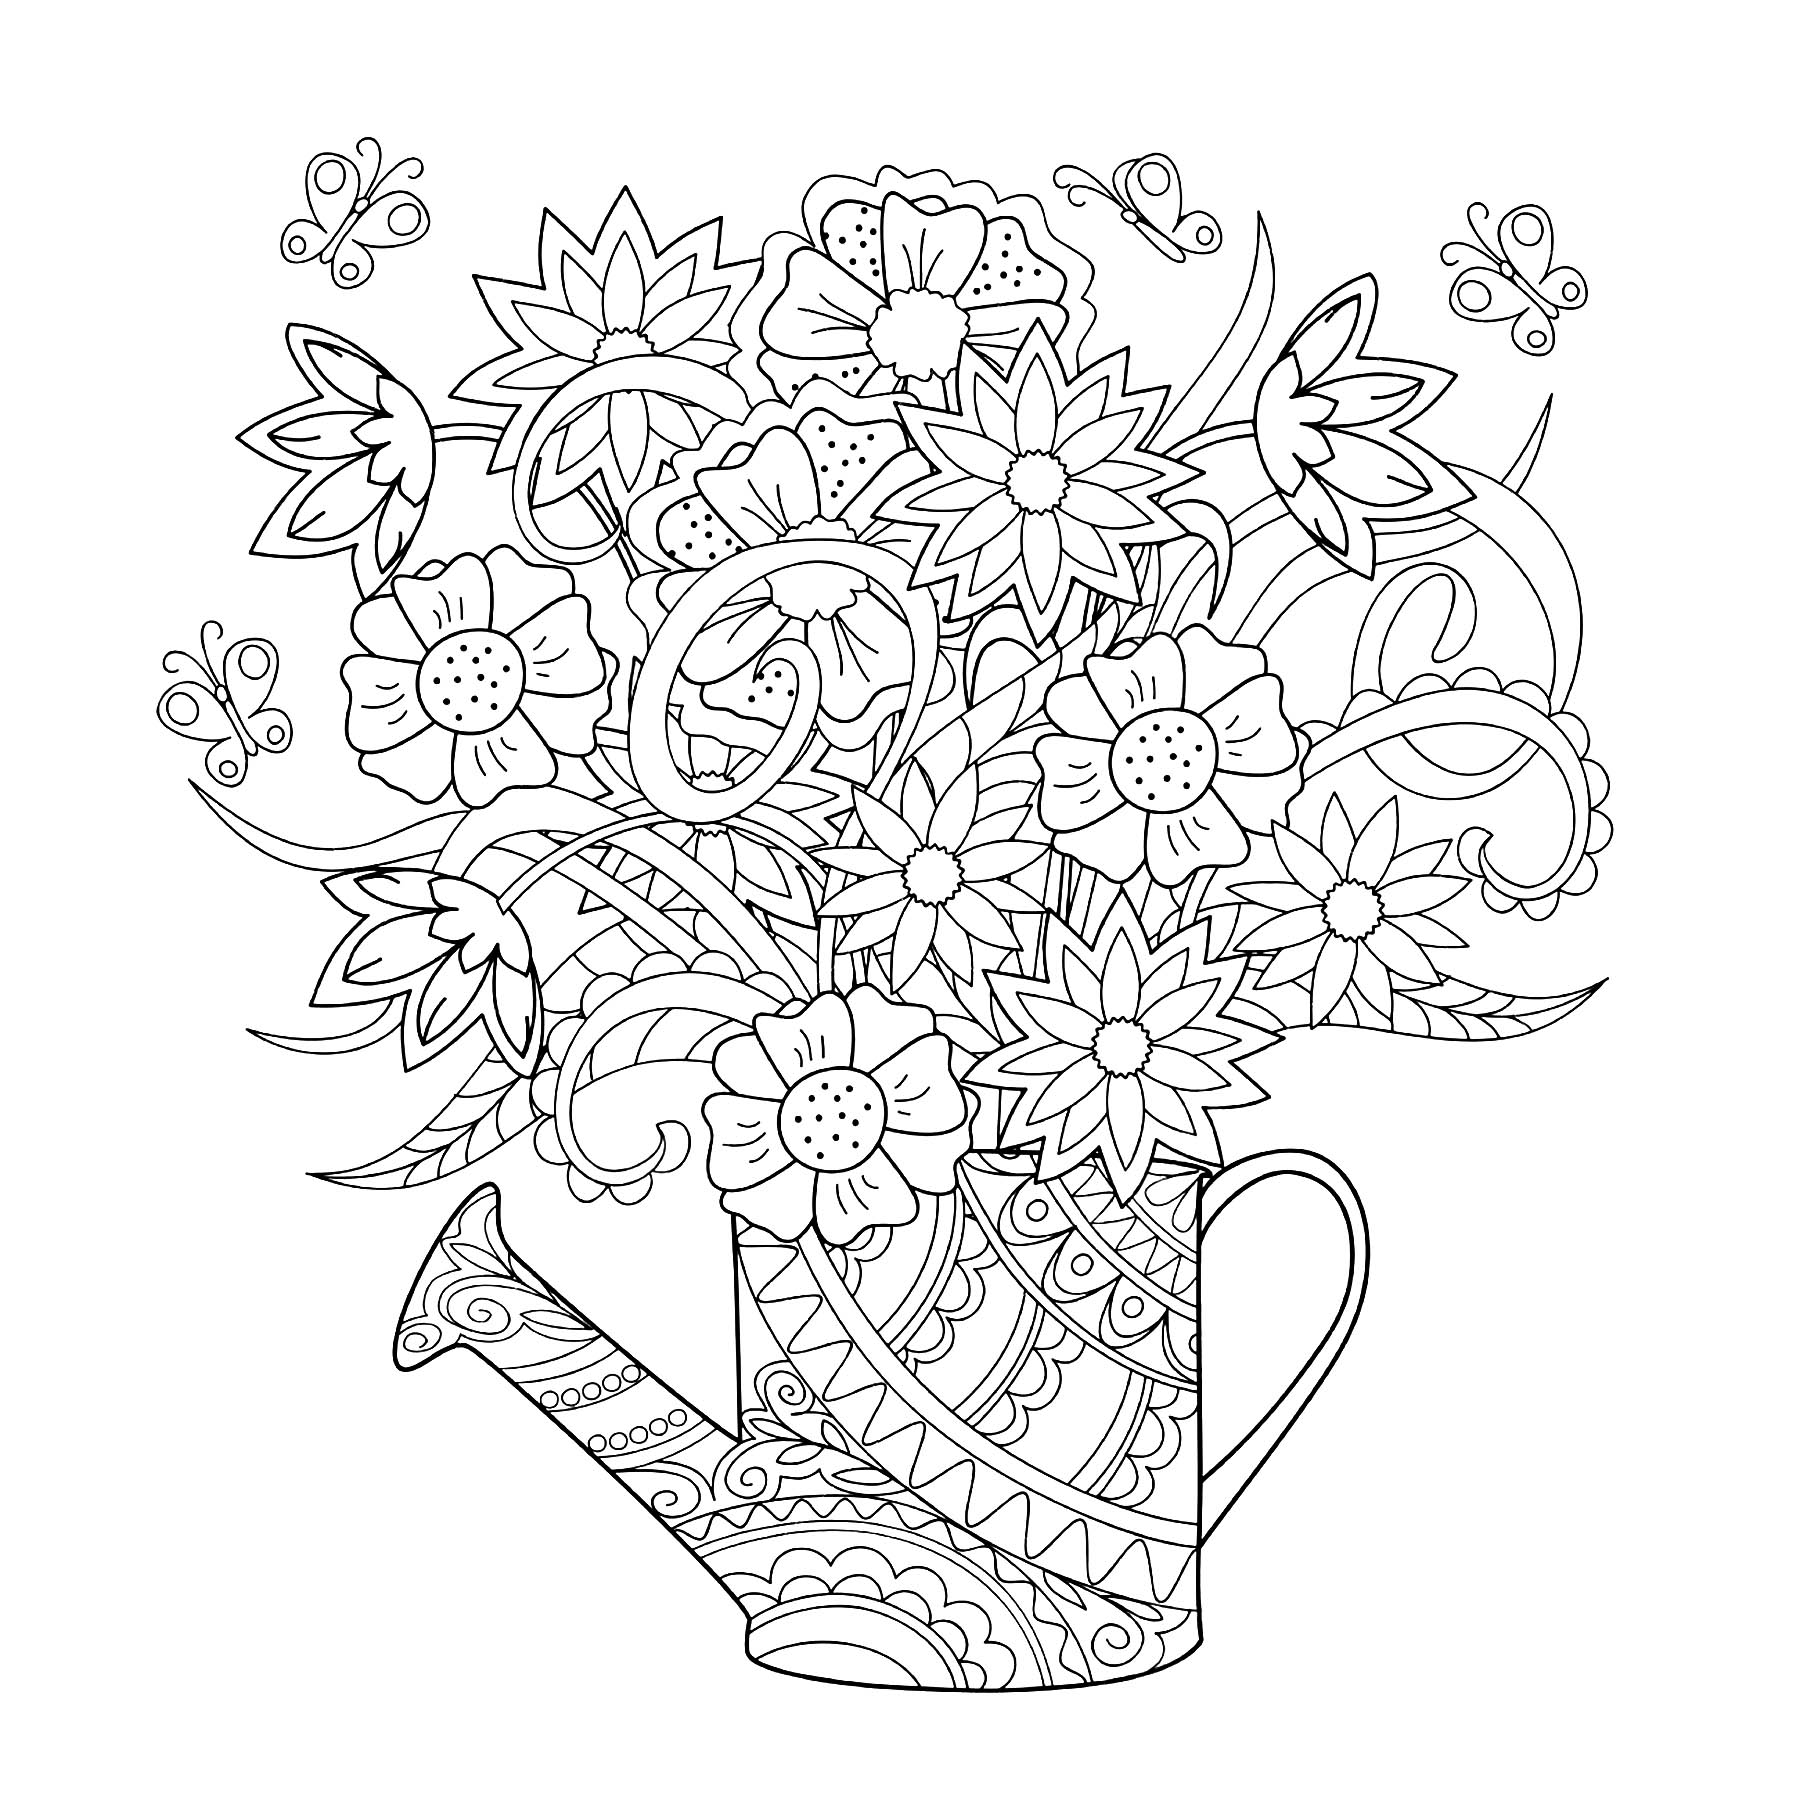 Download Watering can with flowers - Flowers Adult Coloring Pages